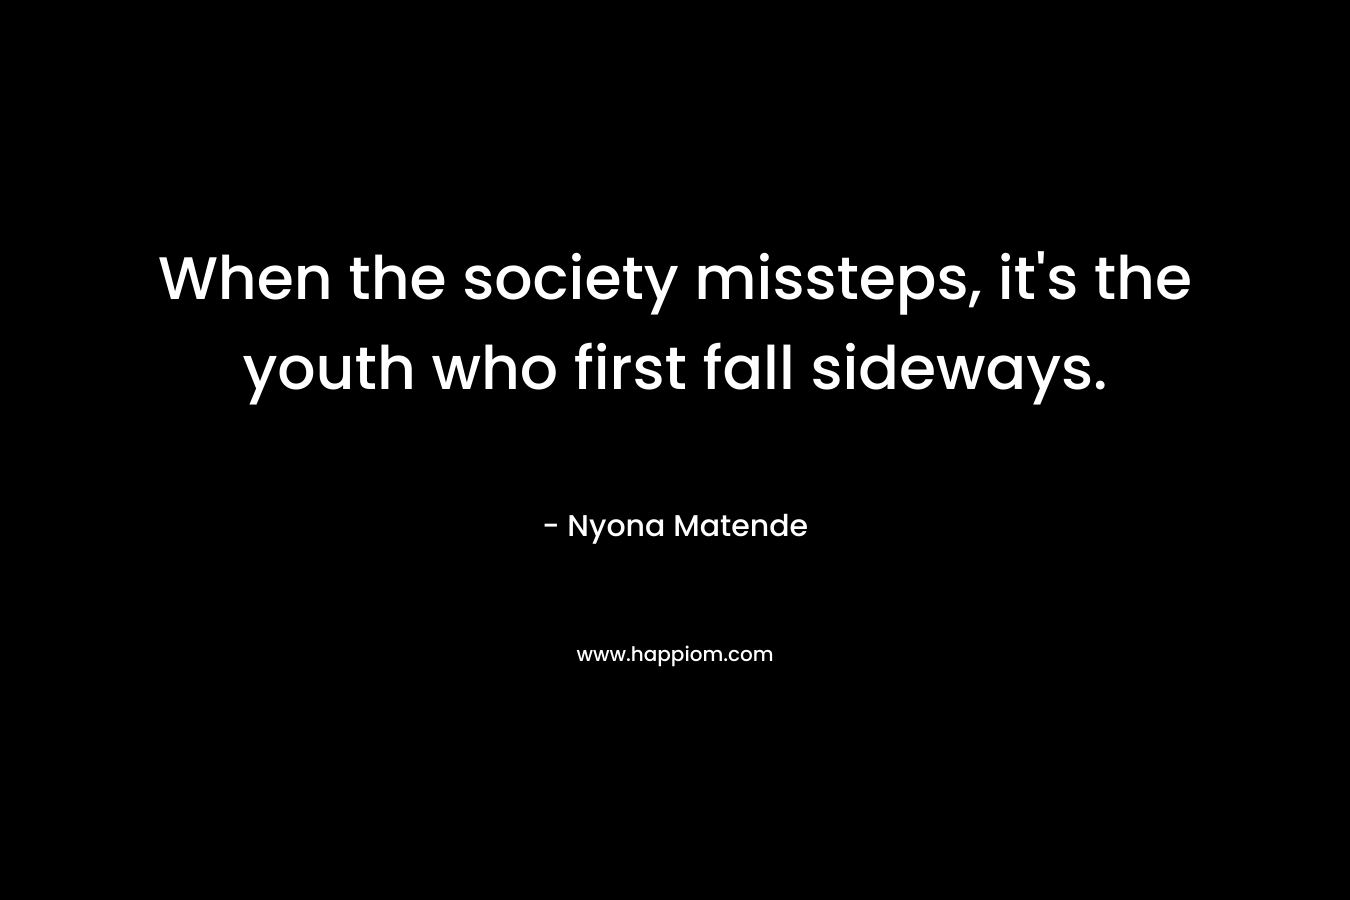 When the society missteps, it’s the youth who first fall sideways. – Nyona Matende